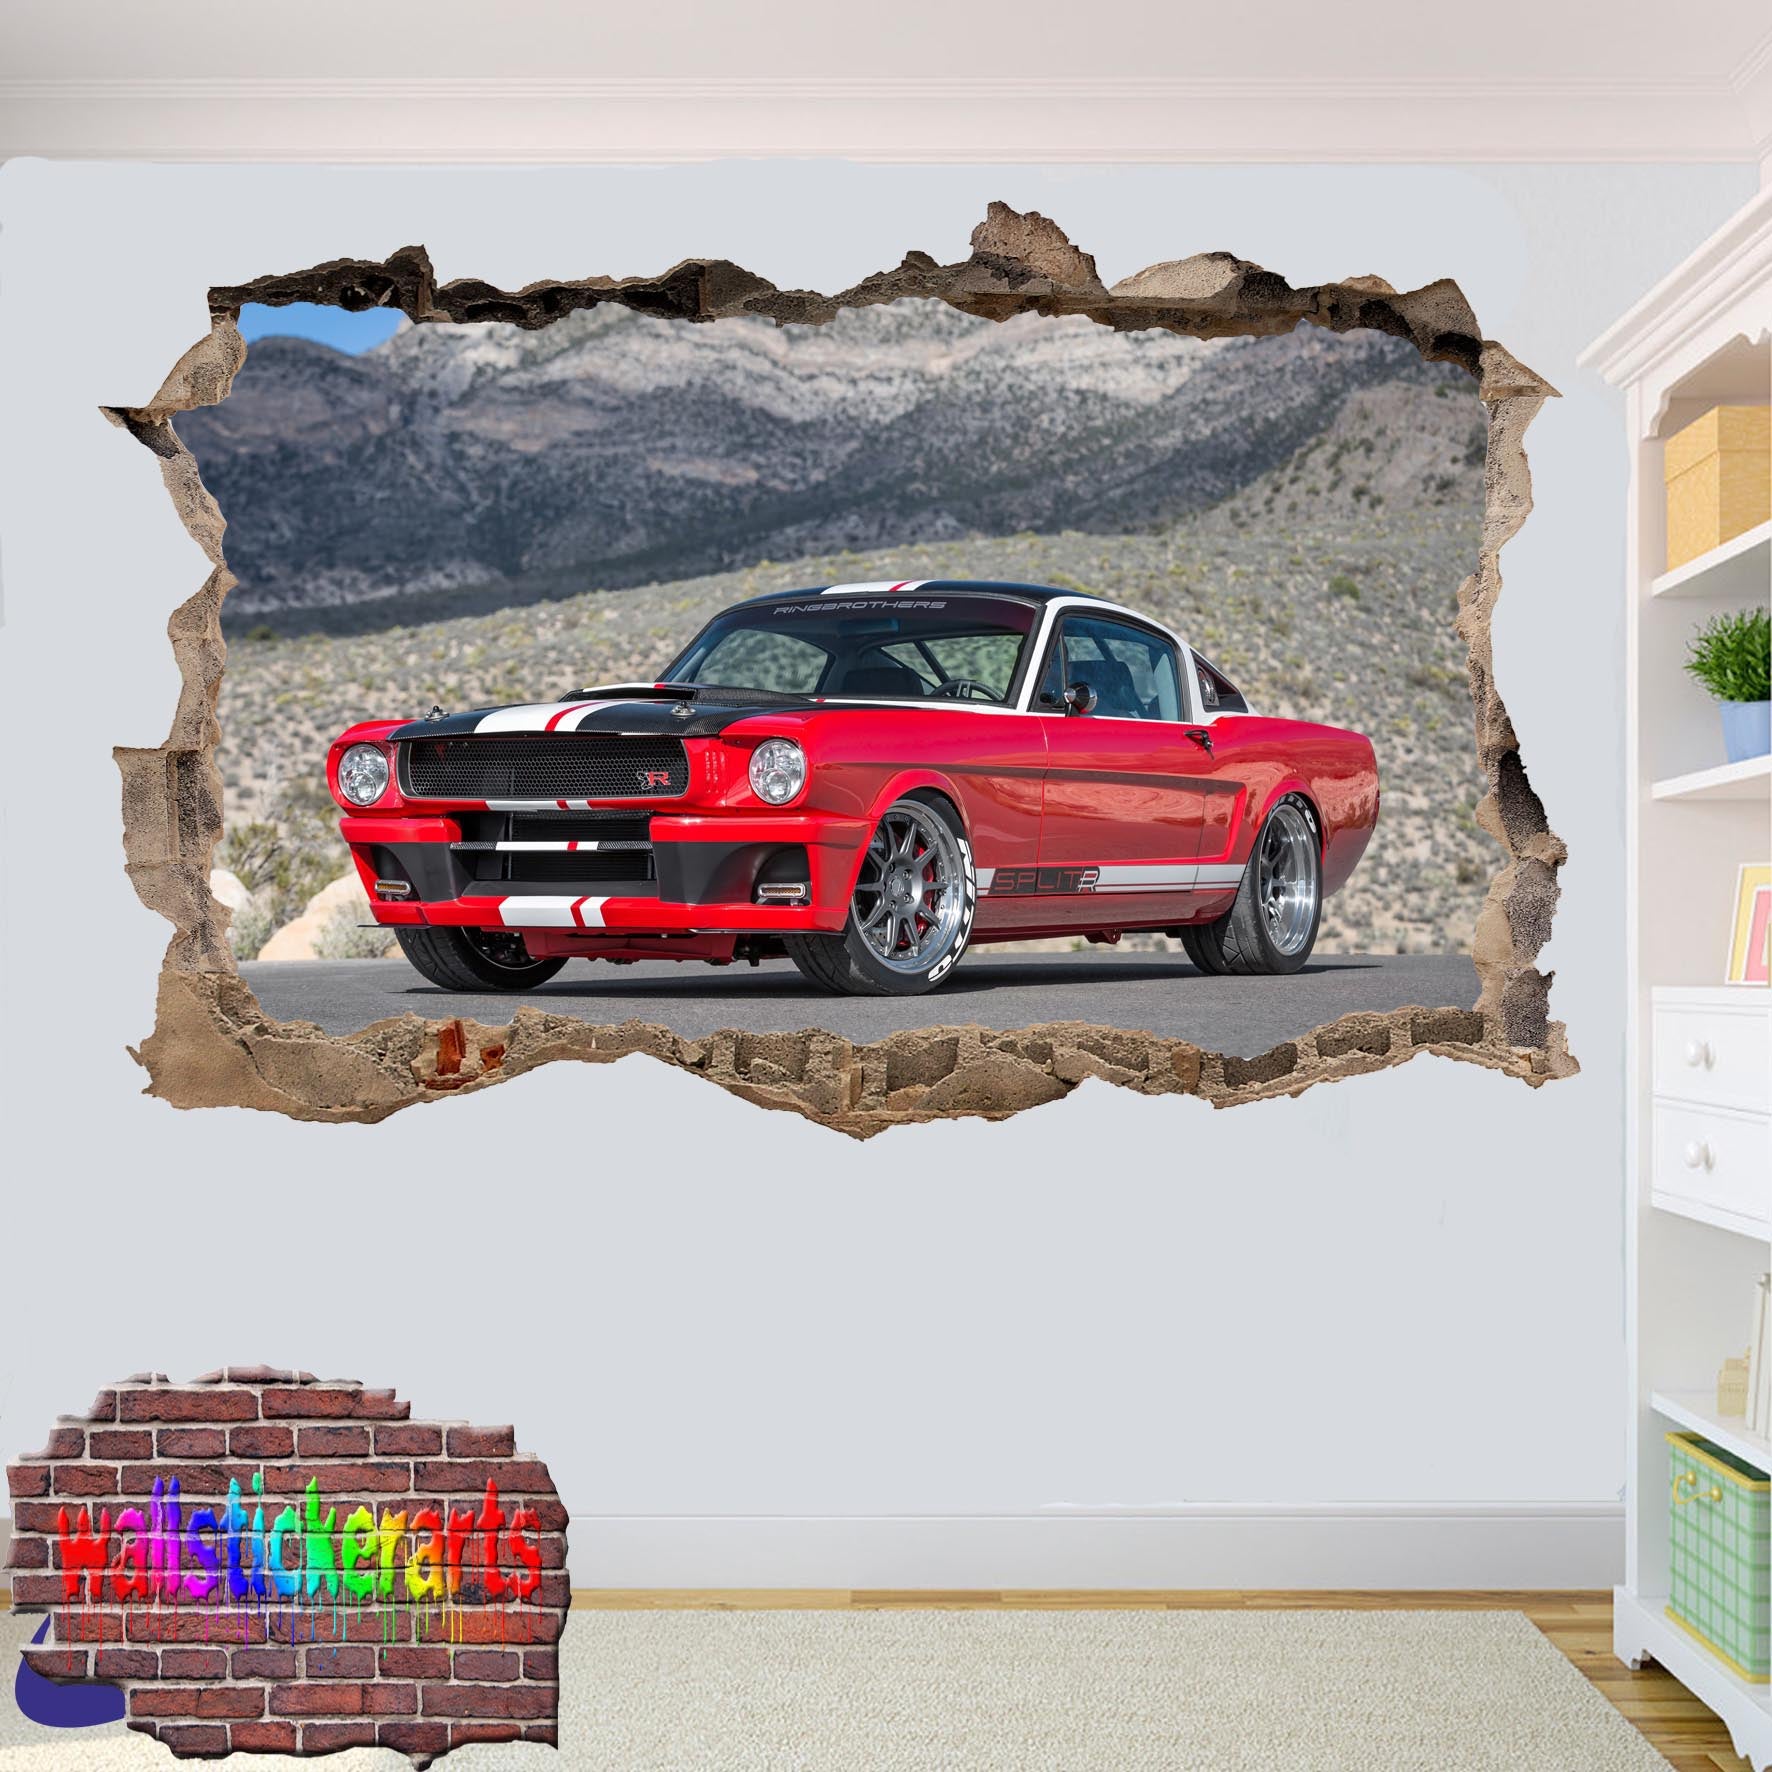 FORD MUSTANG WALL STICKER mural decal poster